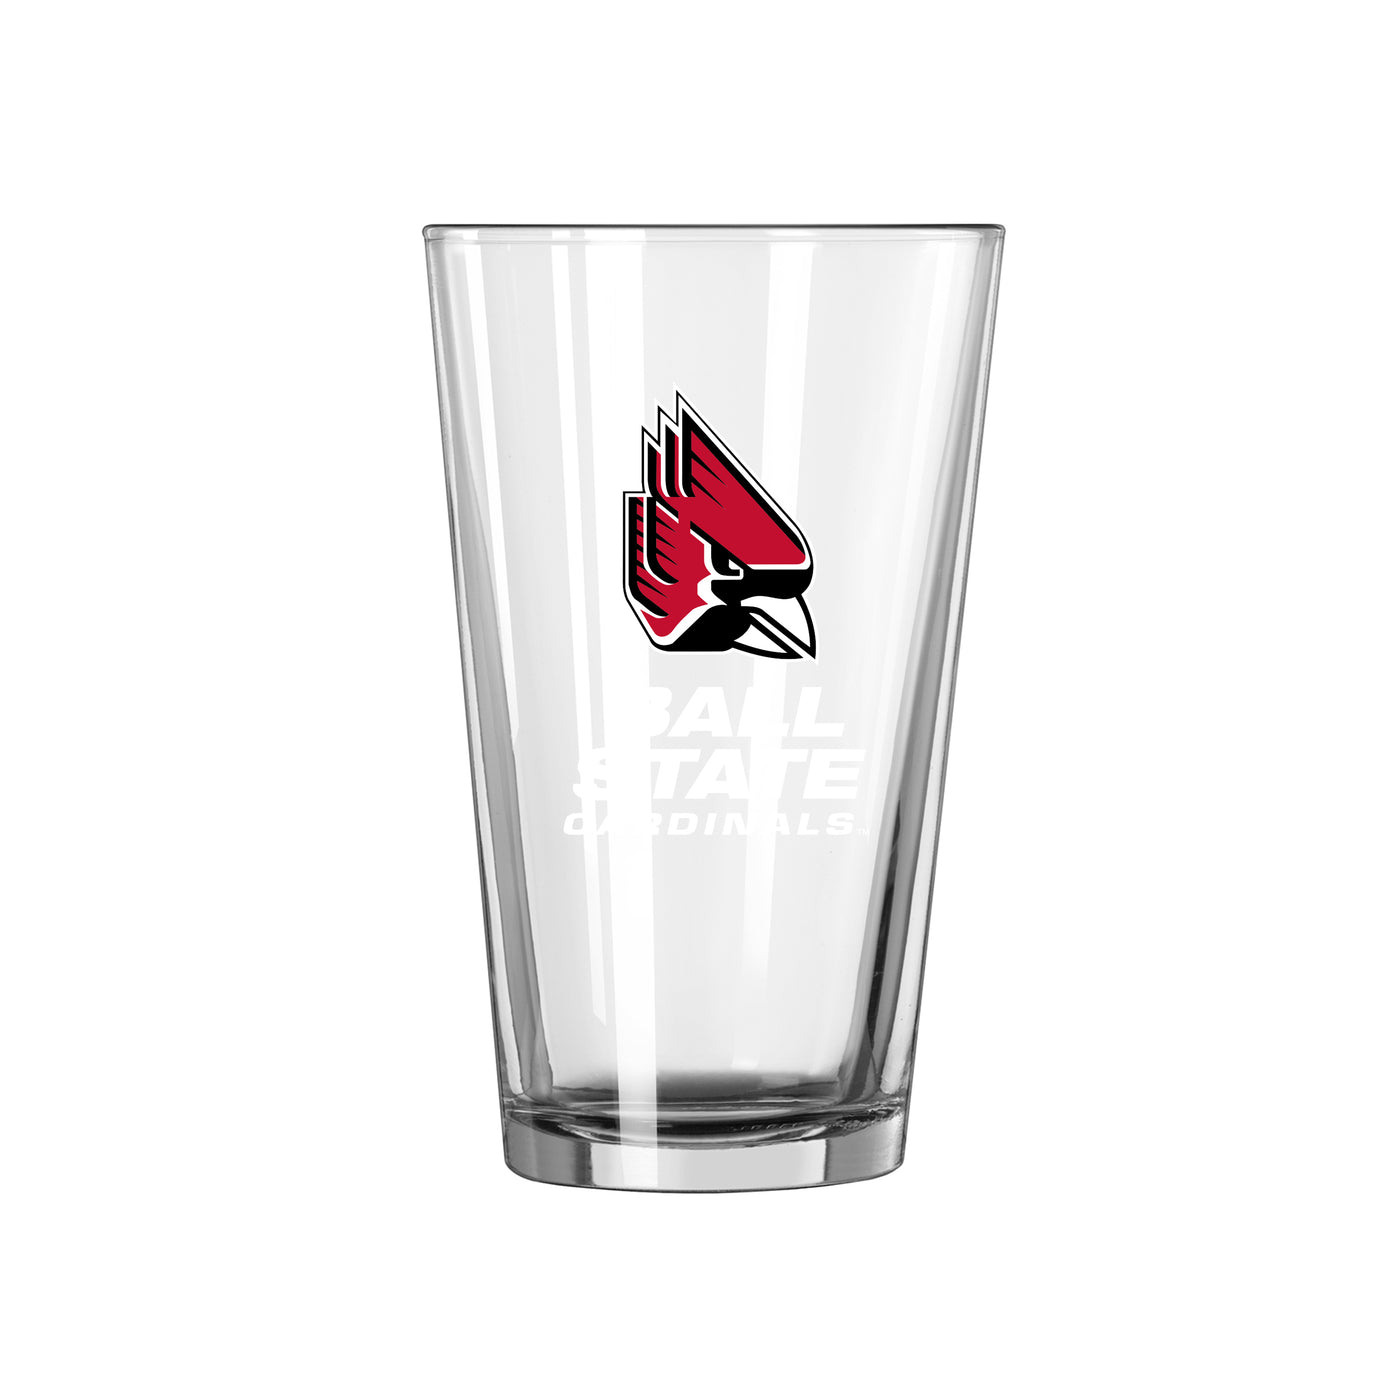 Ball State 16oz Swagger Pint Glass